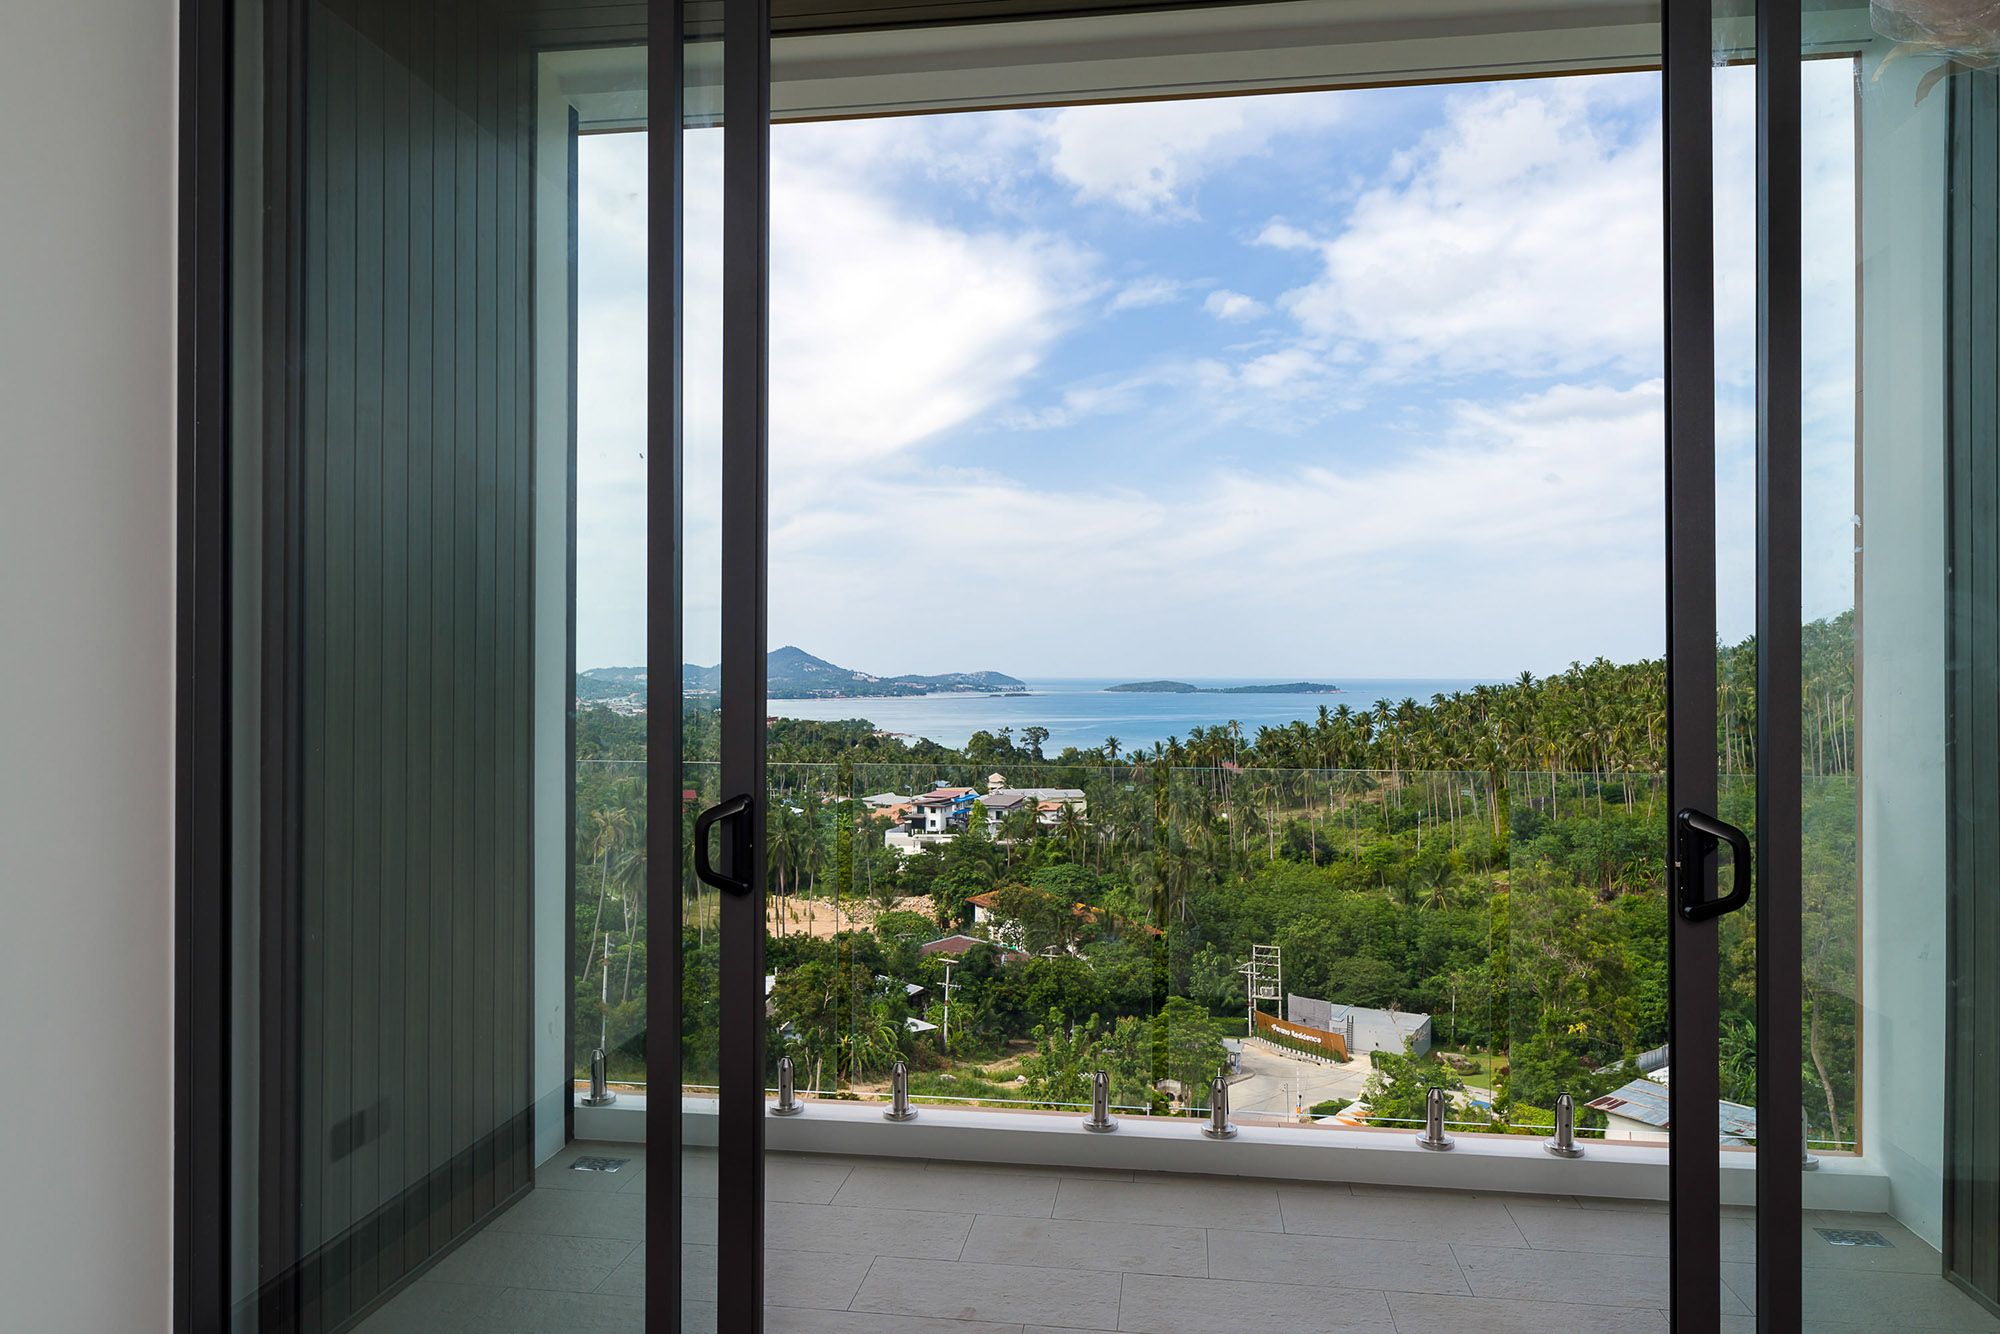 Verano Residence - 3 Bedroom Seaview Pool Villa in Chaweng Noi: 3 bedroom sea view villa located at Chaweng Noi